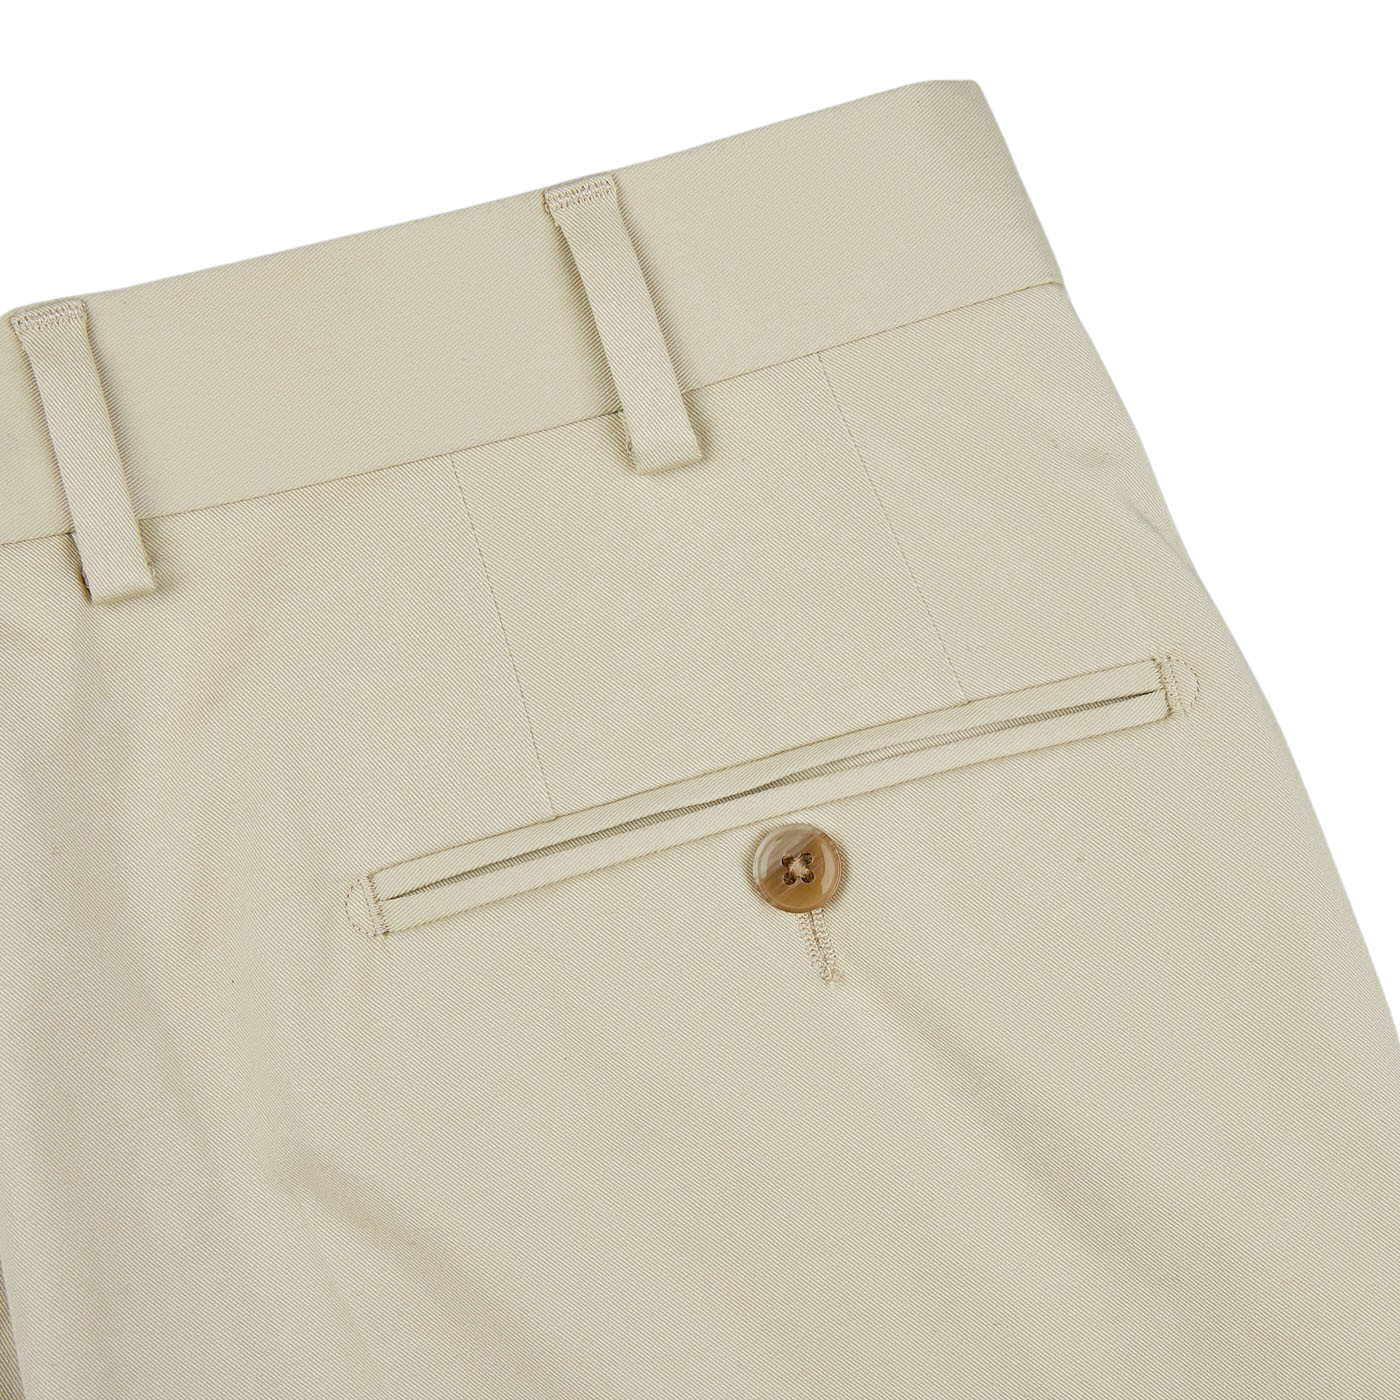 Luigi Bianchi Light Beige Cotton Twill Flat Front Trousers with buttons on the side, in regular fit.